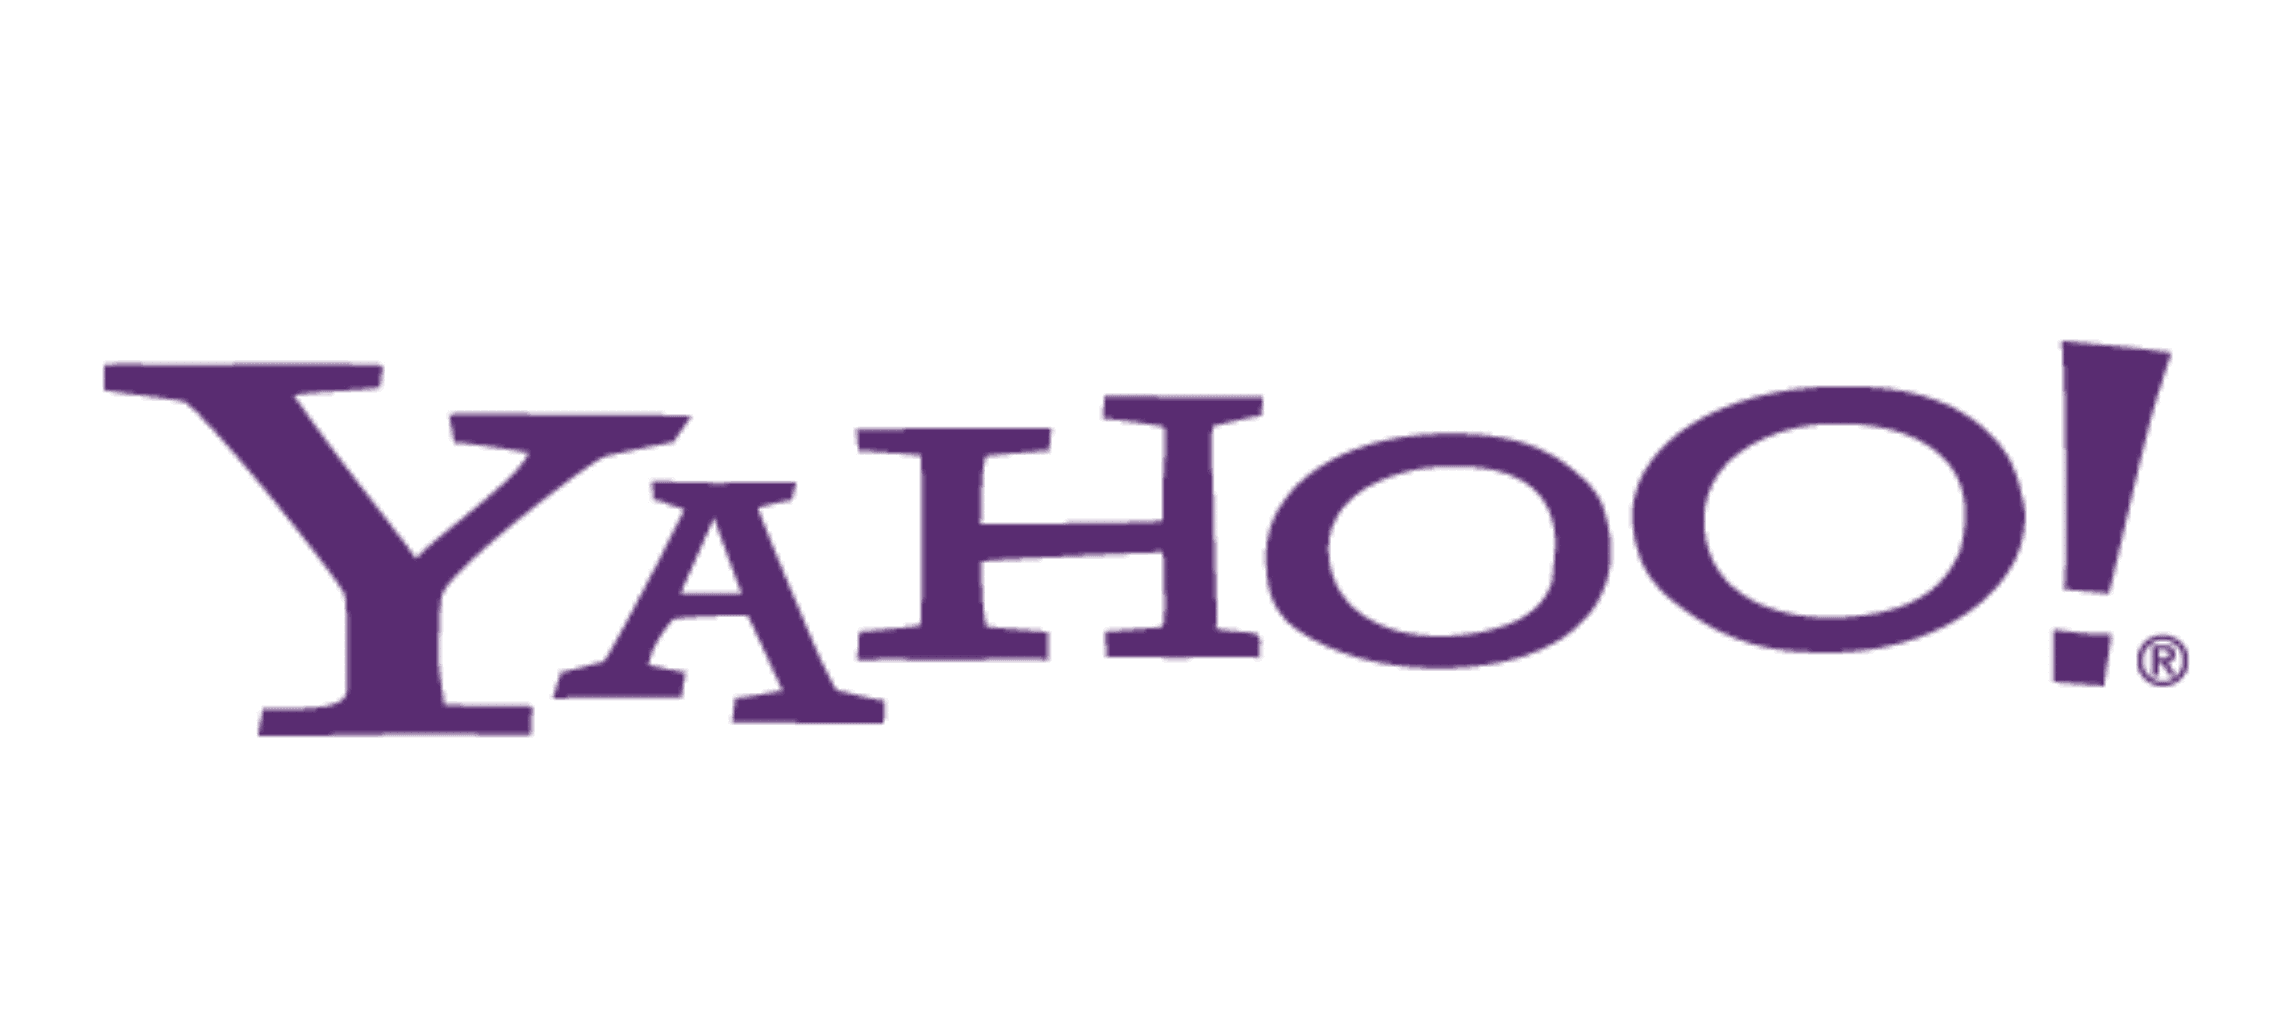 Hackers Now Control Over 200 Yahoo Accounts